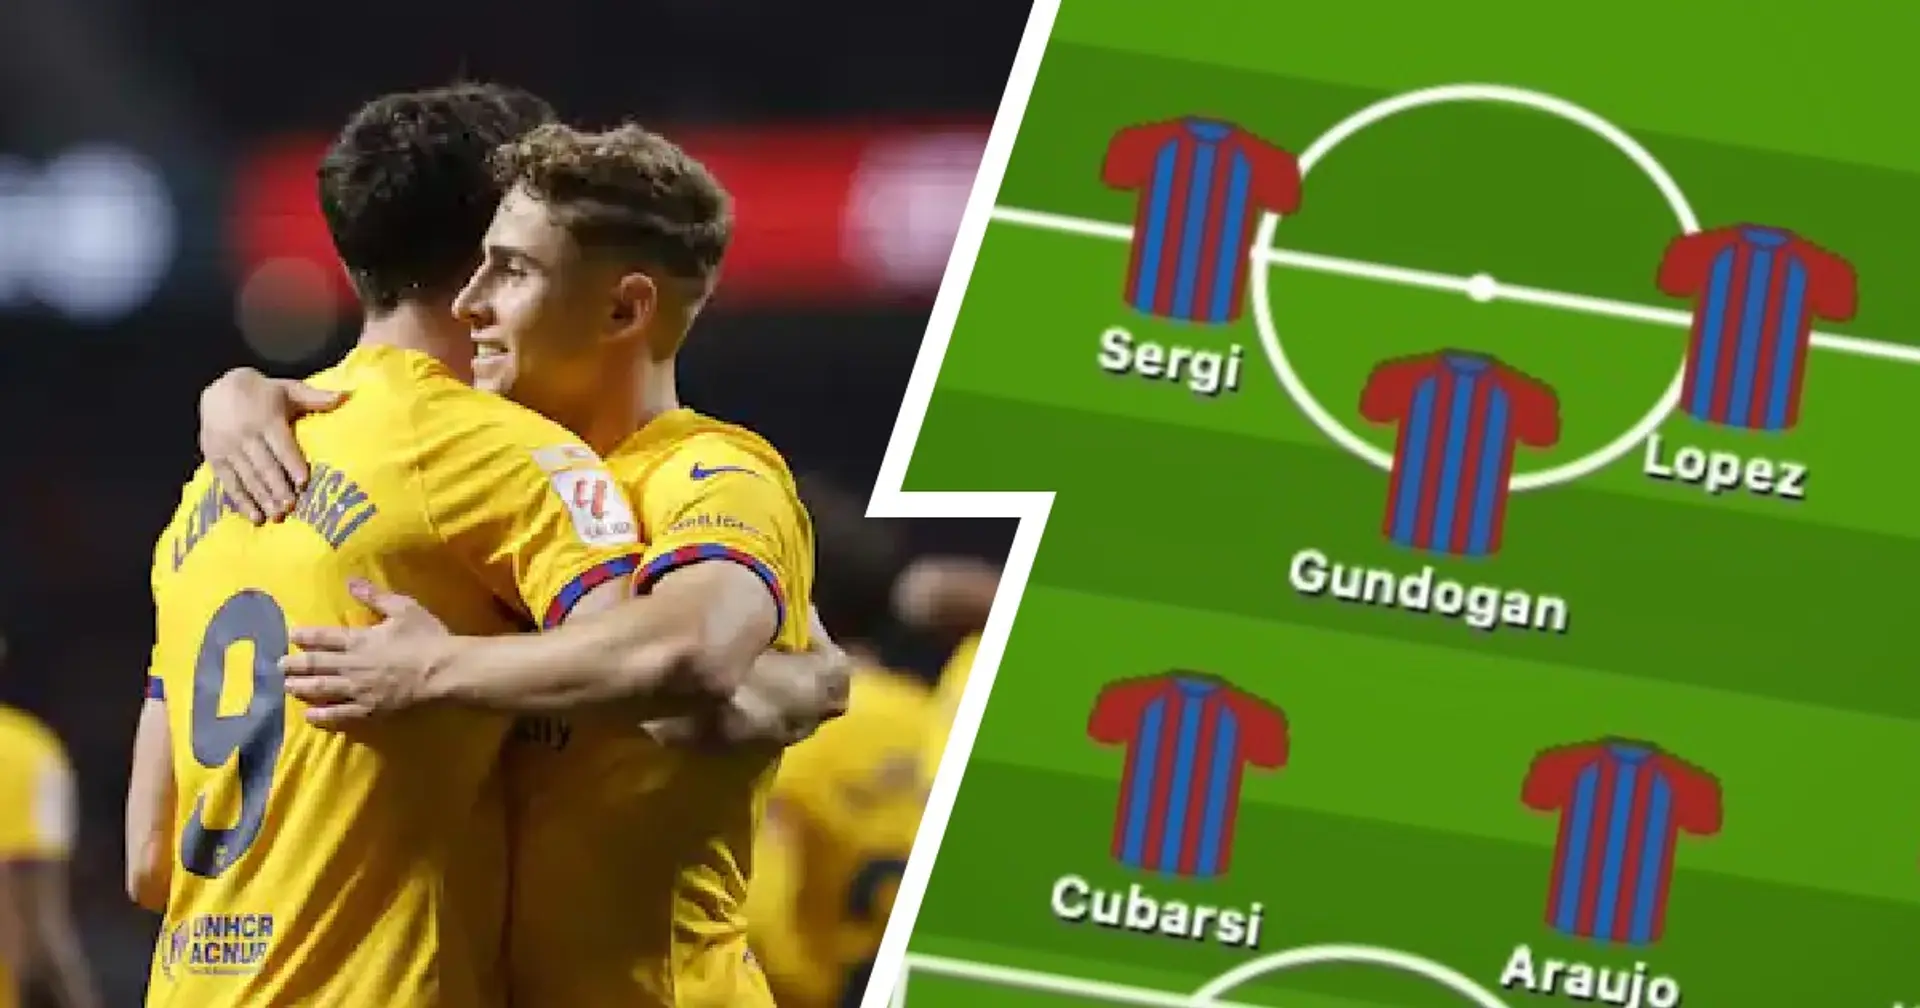 Barca's biggest strength in Atletico Madrid victory shown in line-up